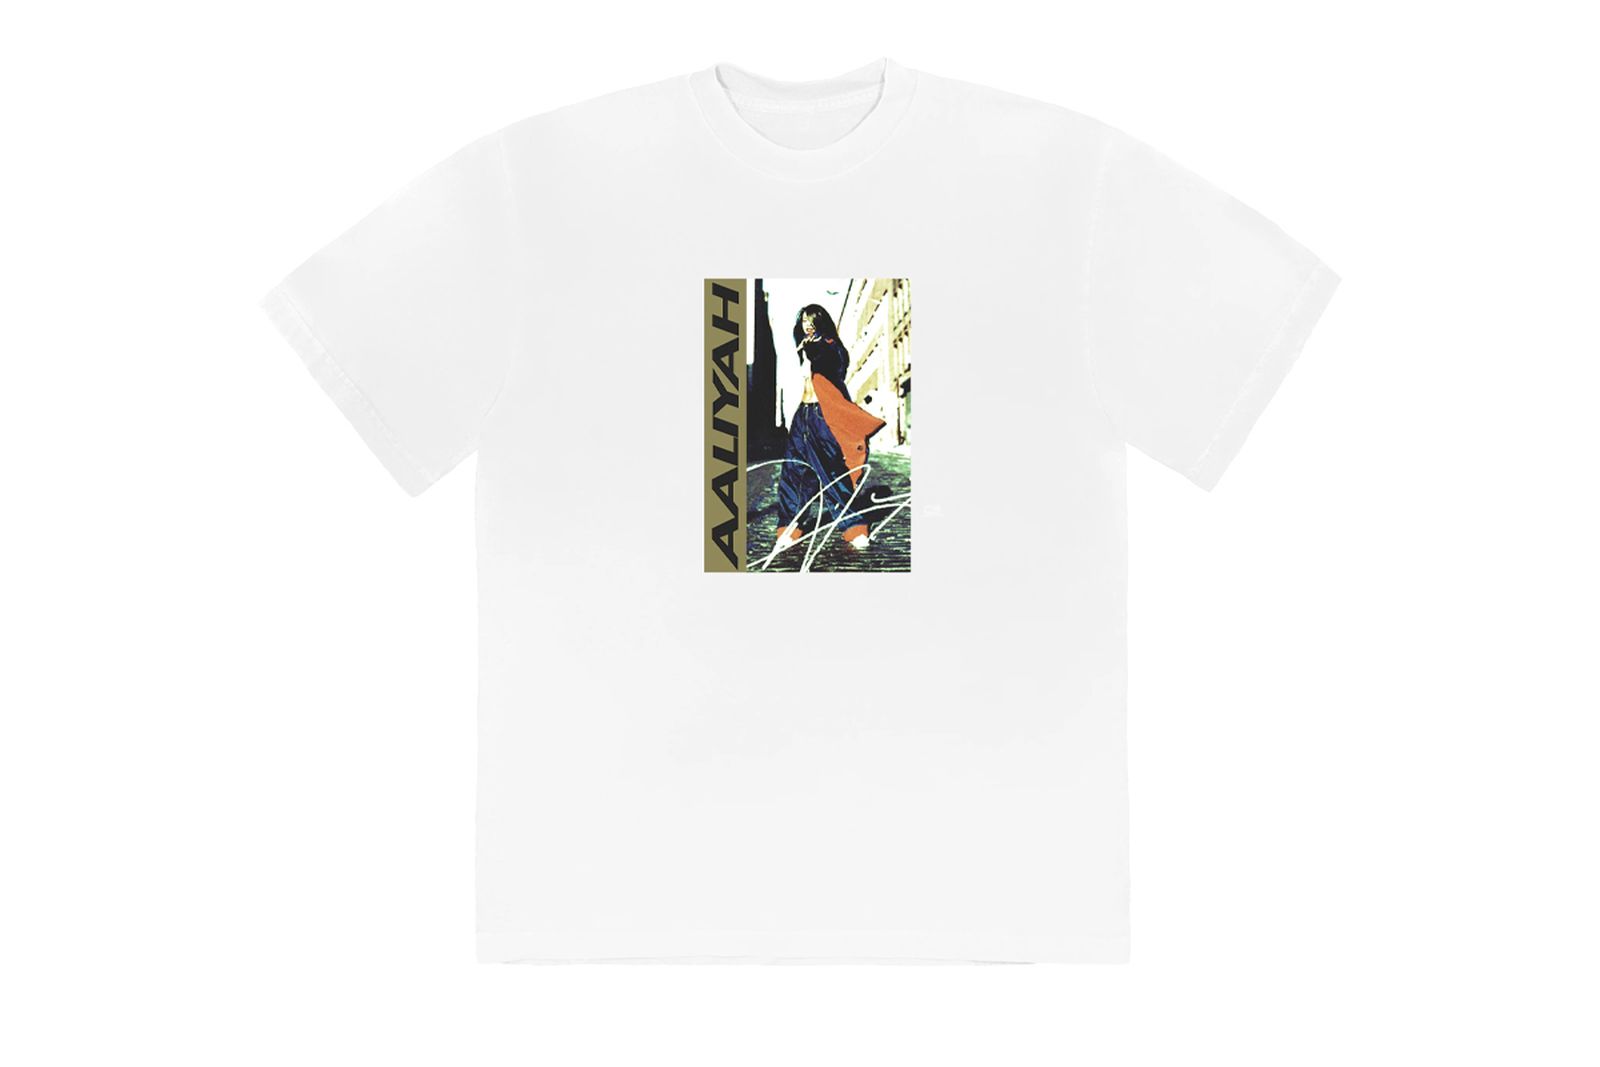 aaliyah-one-in-a-million-merch-release-date-price-info-07